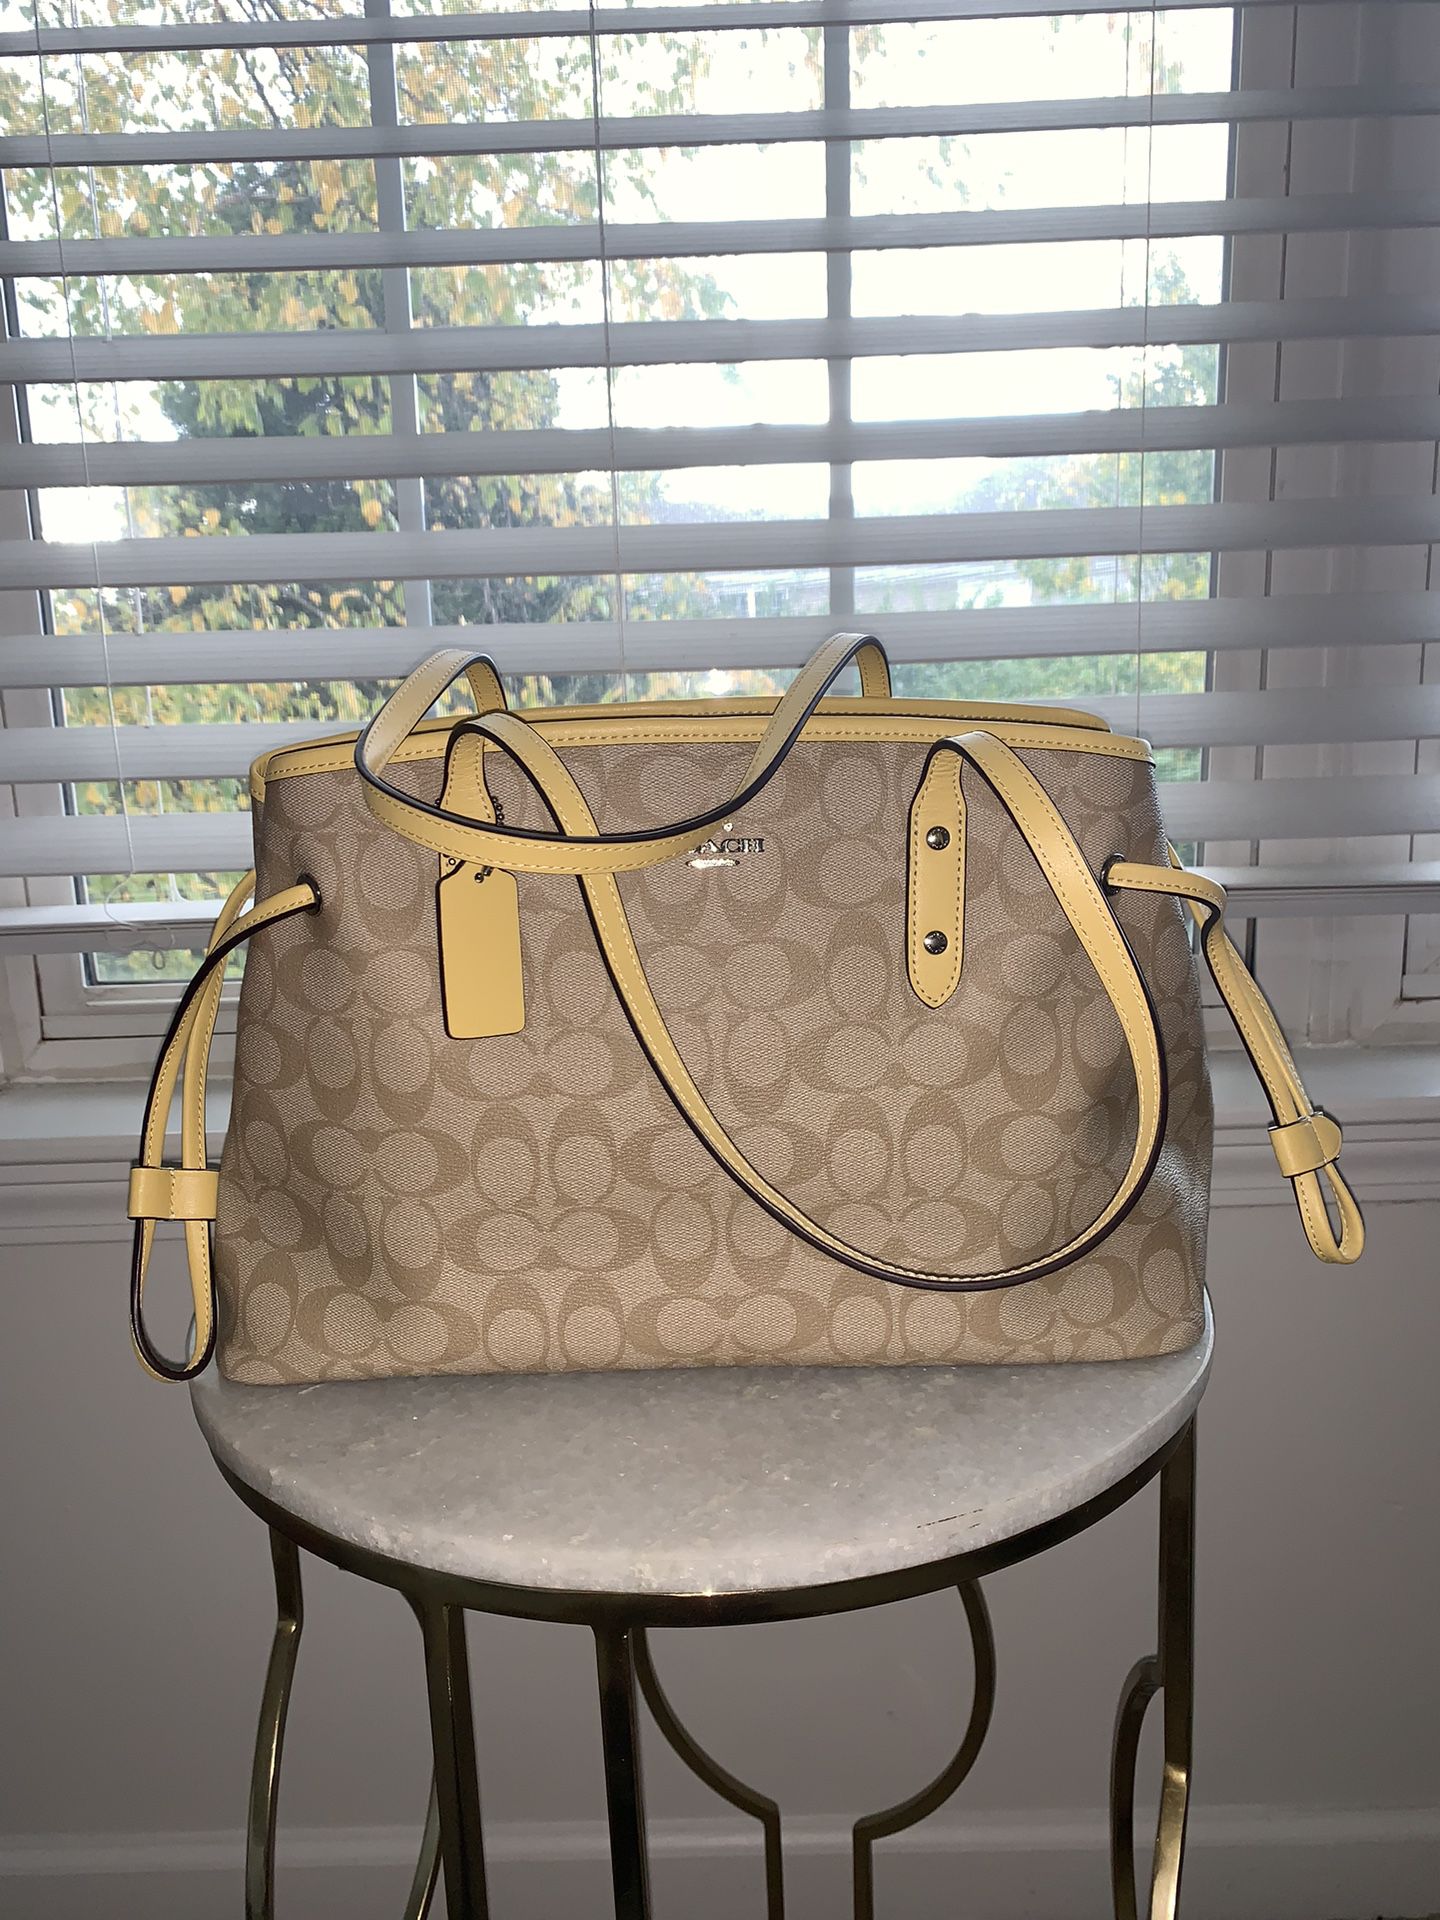 Coach Drawstring Carryall Signature Canvas Tote Bag in Light Khaki / Yellow - New With Tag